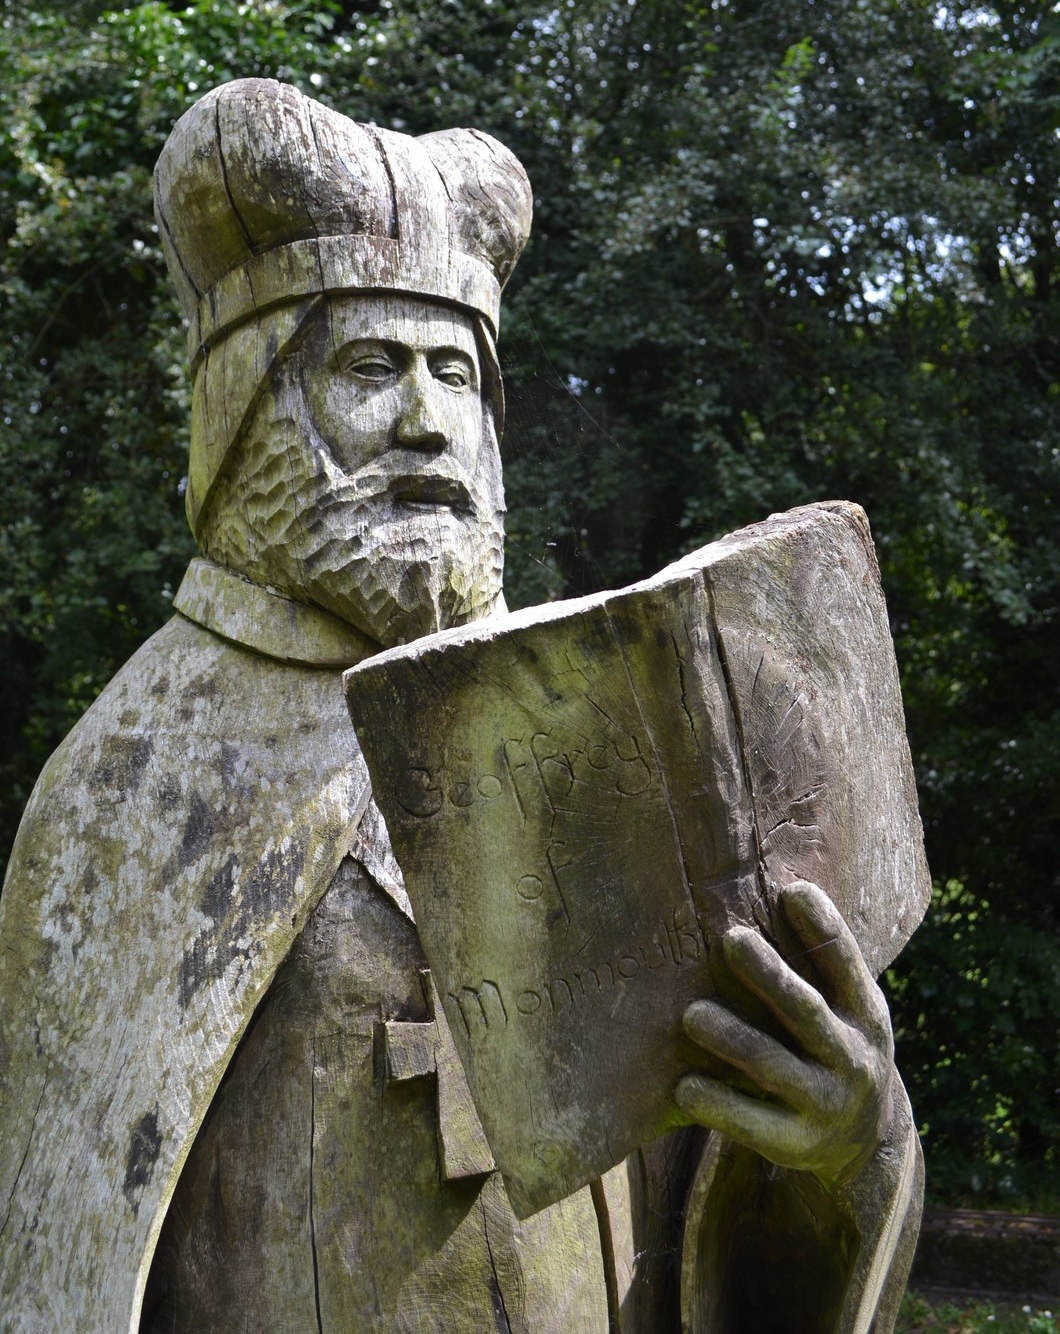 Photograph of a statue of Geoffrey of Monmouth at Tintern Station. Statue is a wooden sculpture of a figure in bishop's garb, holding a book with 